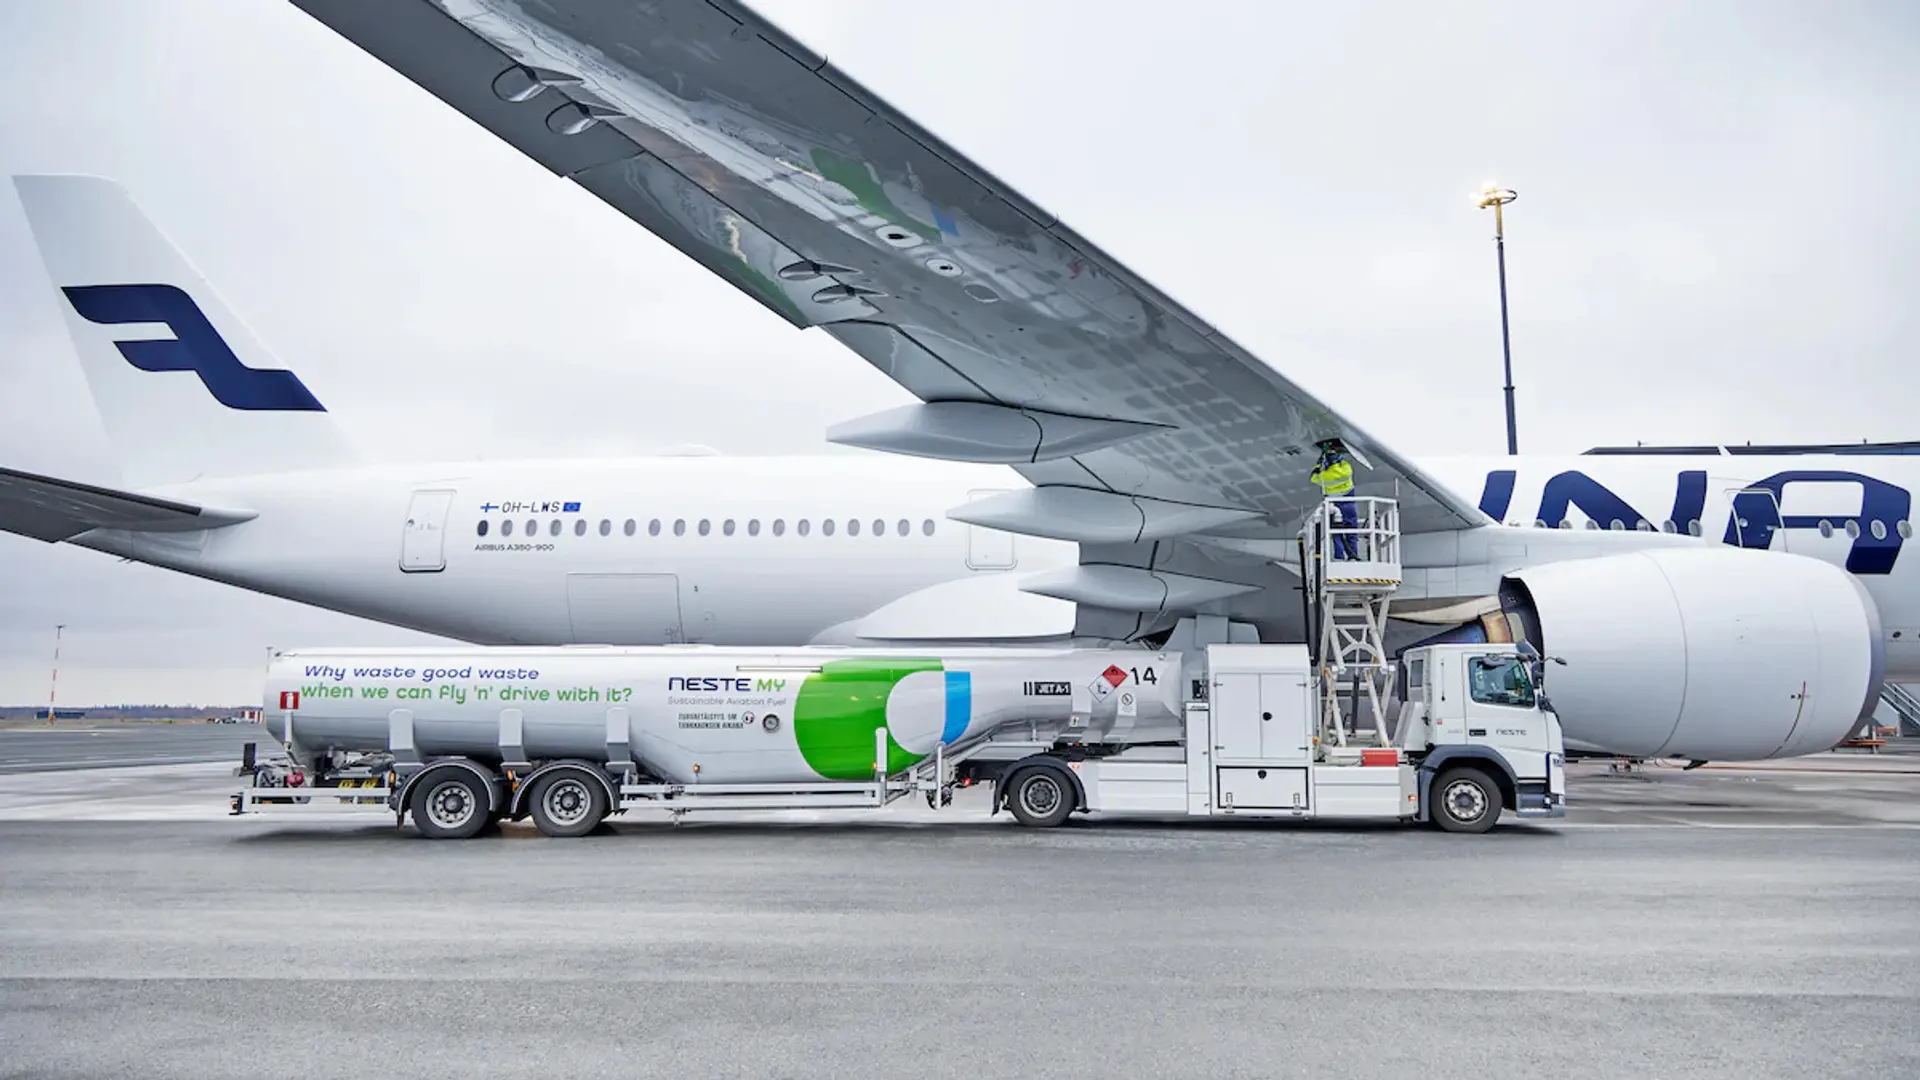 Airlines News - Finnair commits to more sustainability initiatives